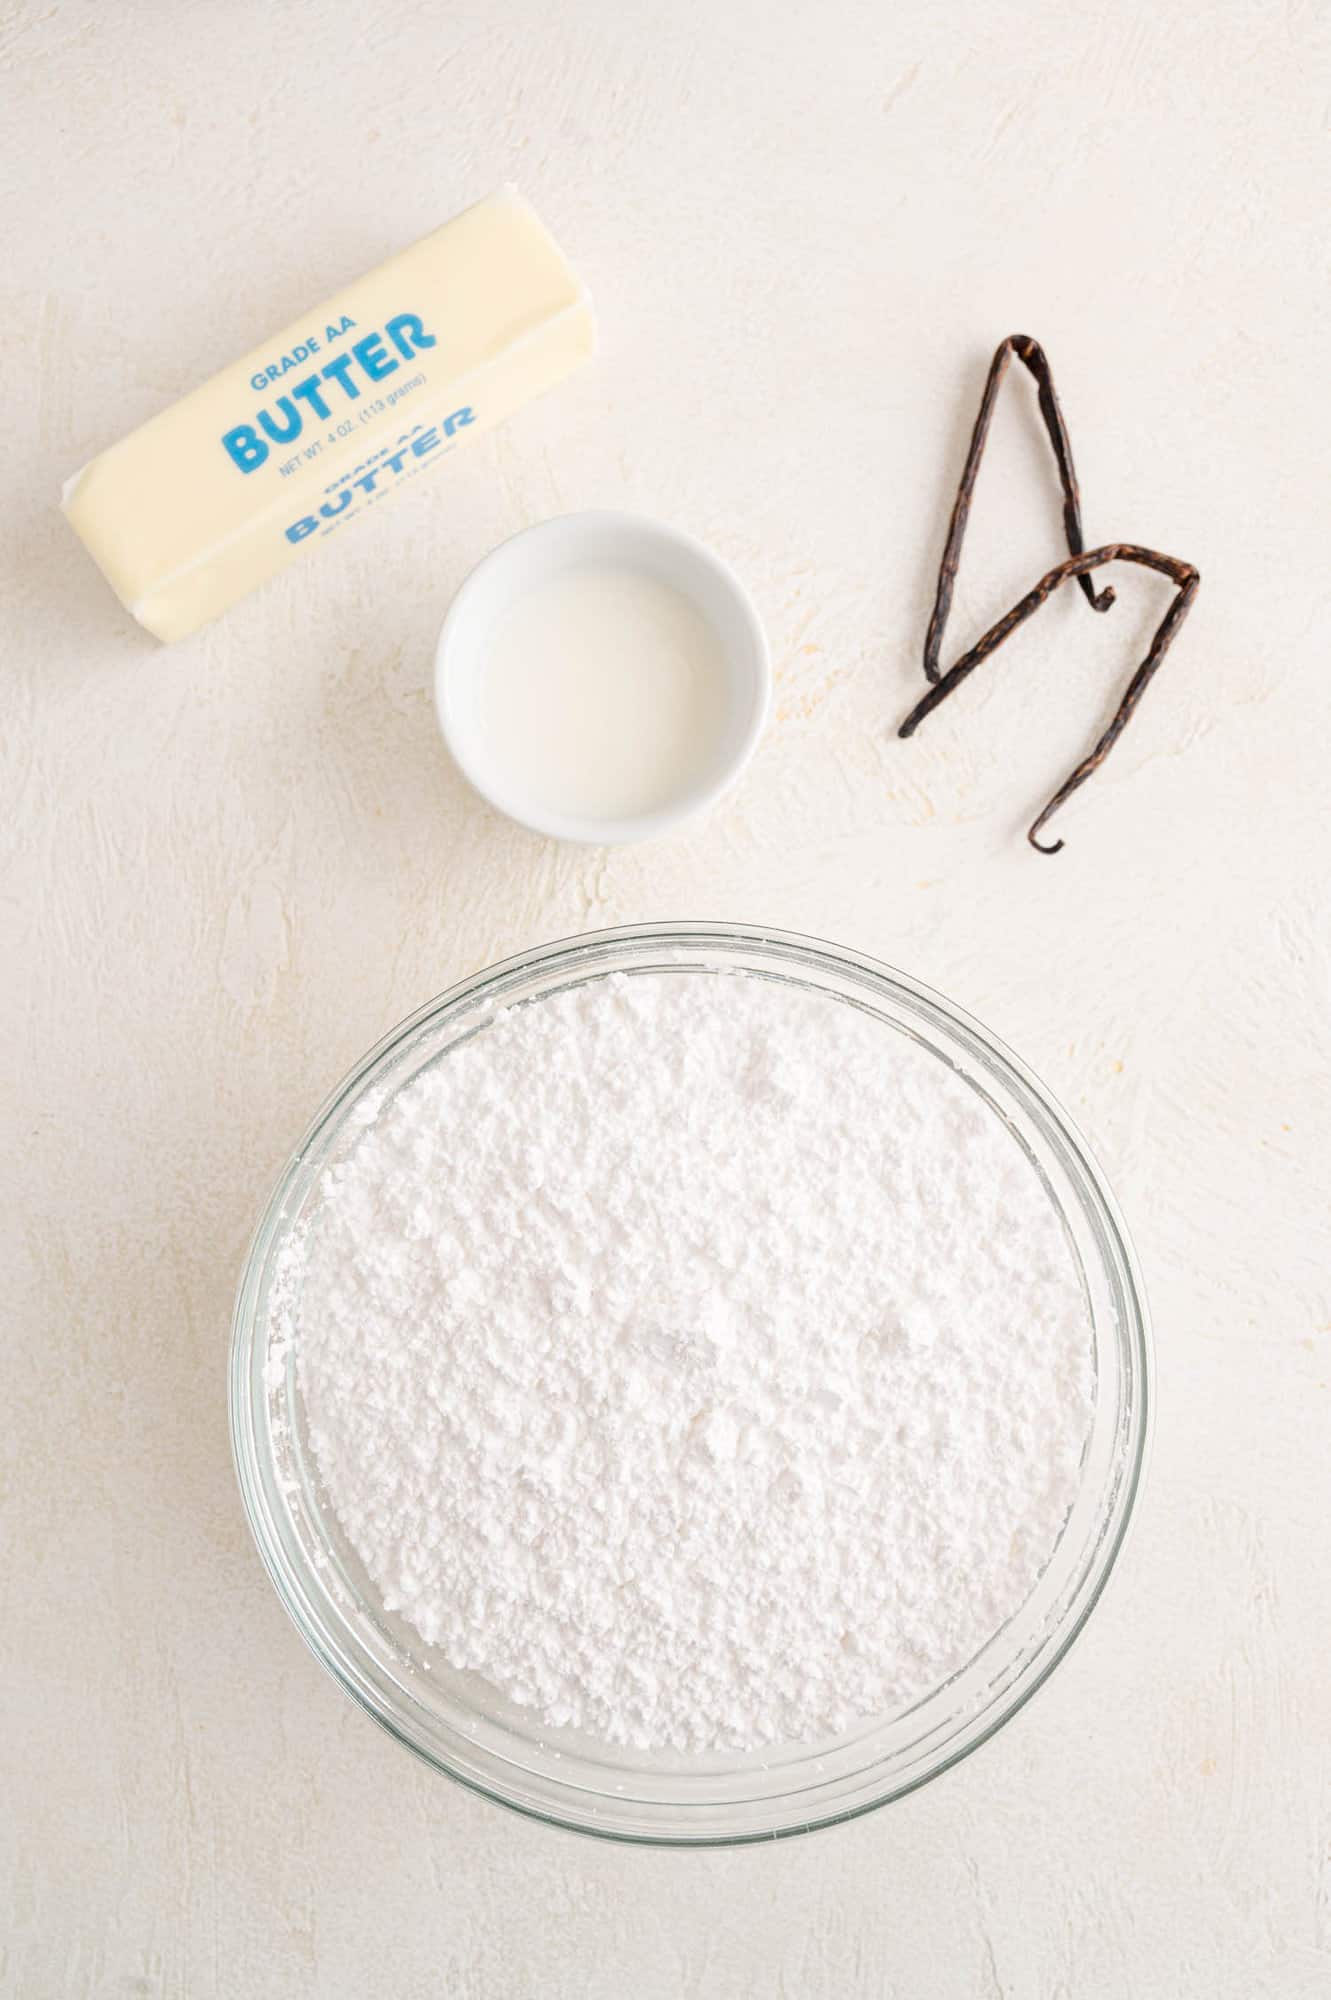 The ingredients for easy vanilla buttercream frosting.